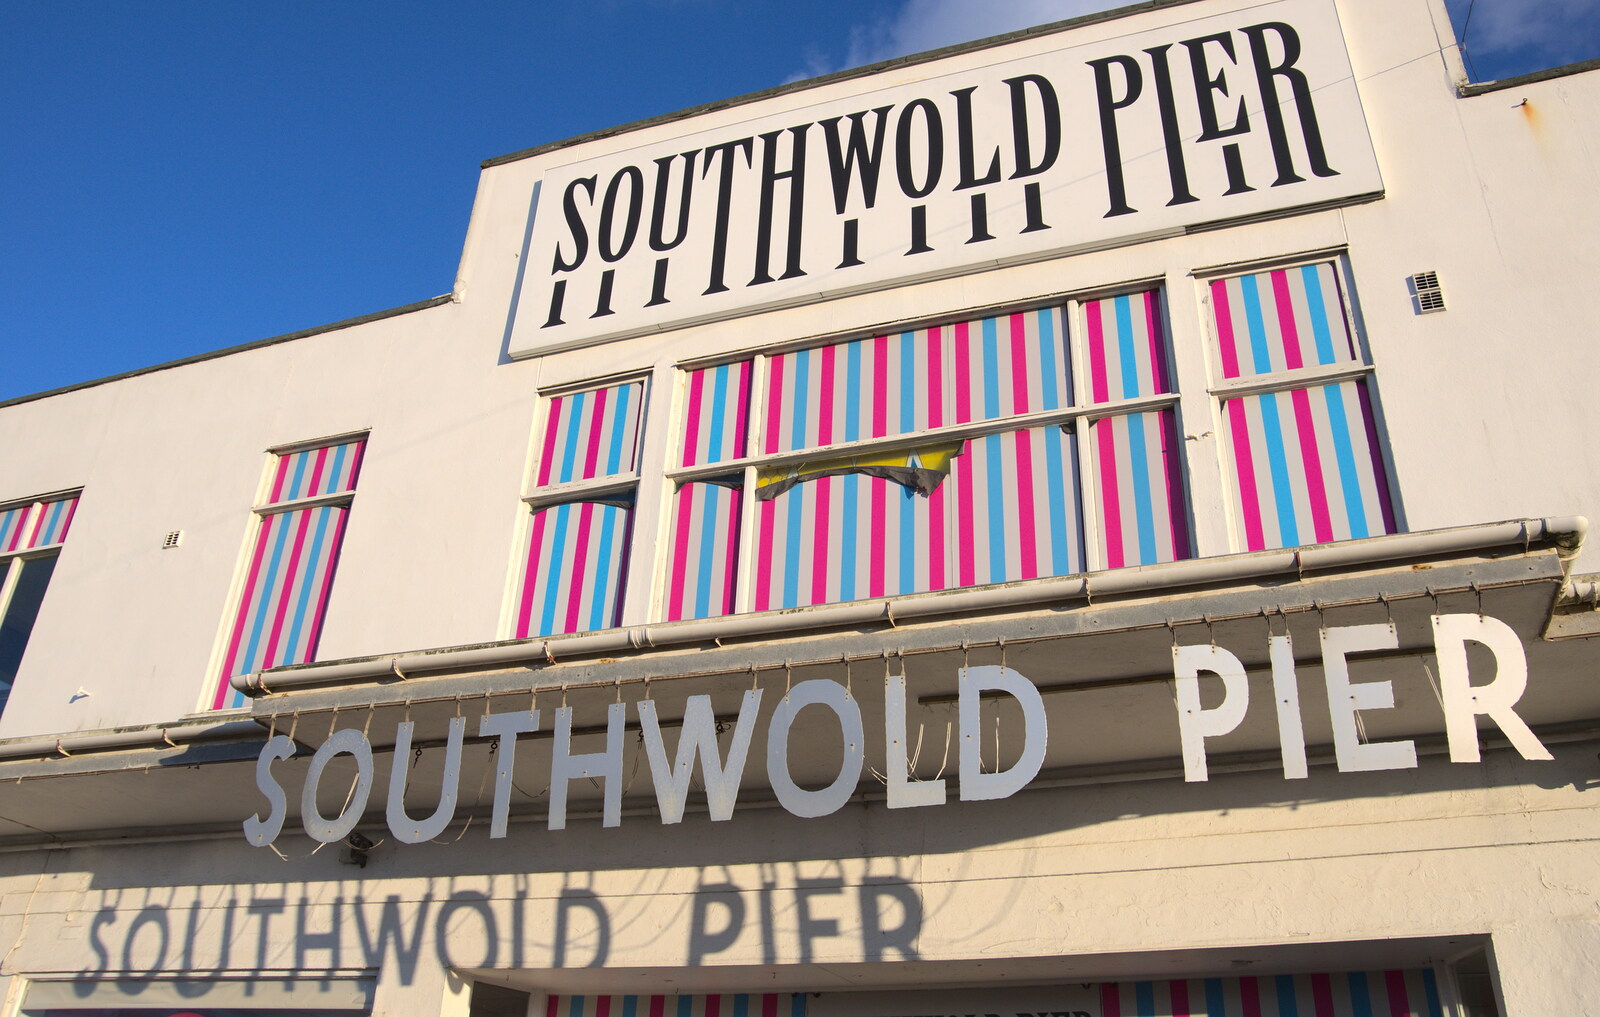 'Southwold Pier' no fewer than four times from A Trip to the Amusements, Southwold Pier, Southwold, Suffolk - 5th November 2017